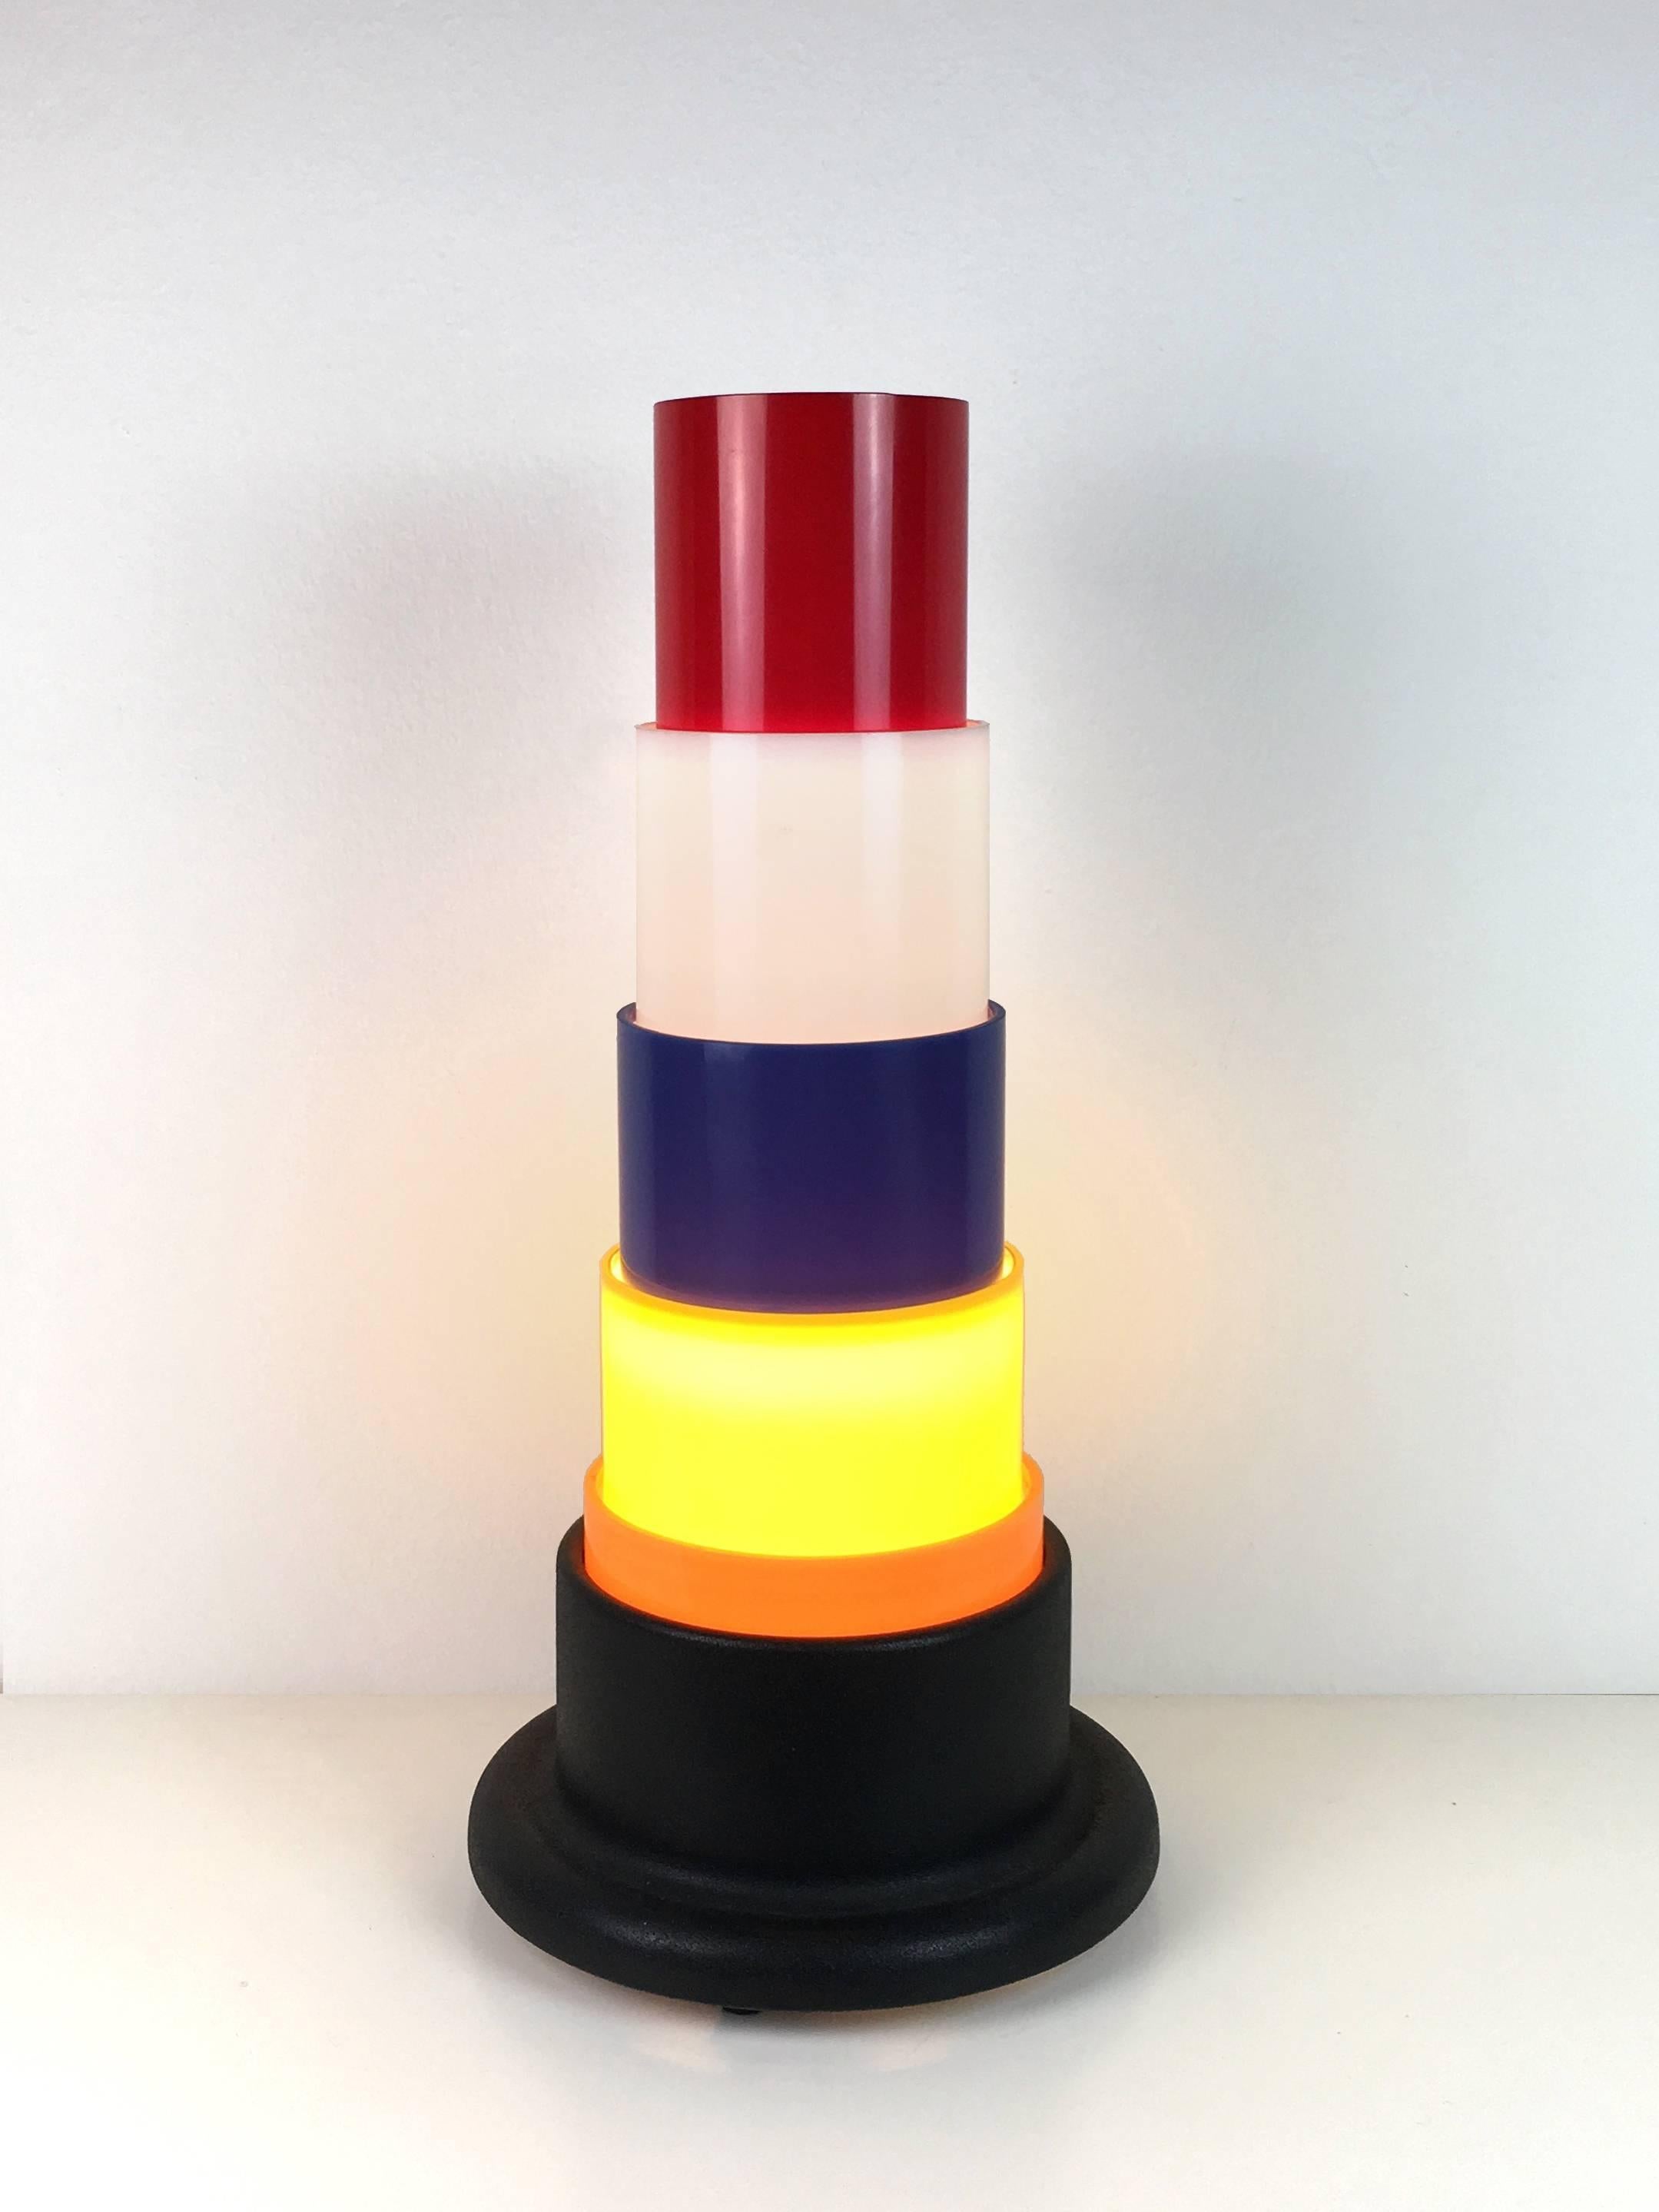 Construction of colorful plastic cylinders on the black aluminium base.
One lamp E27 max. 60W.